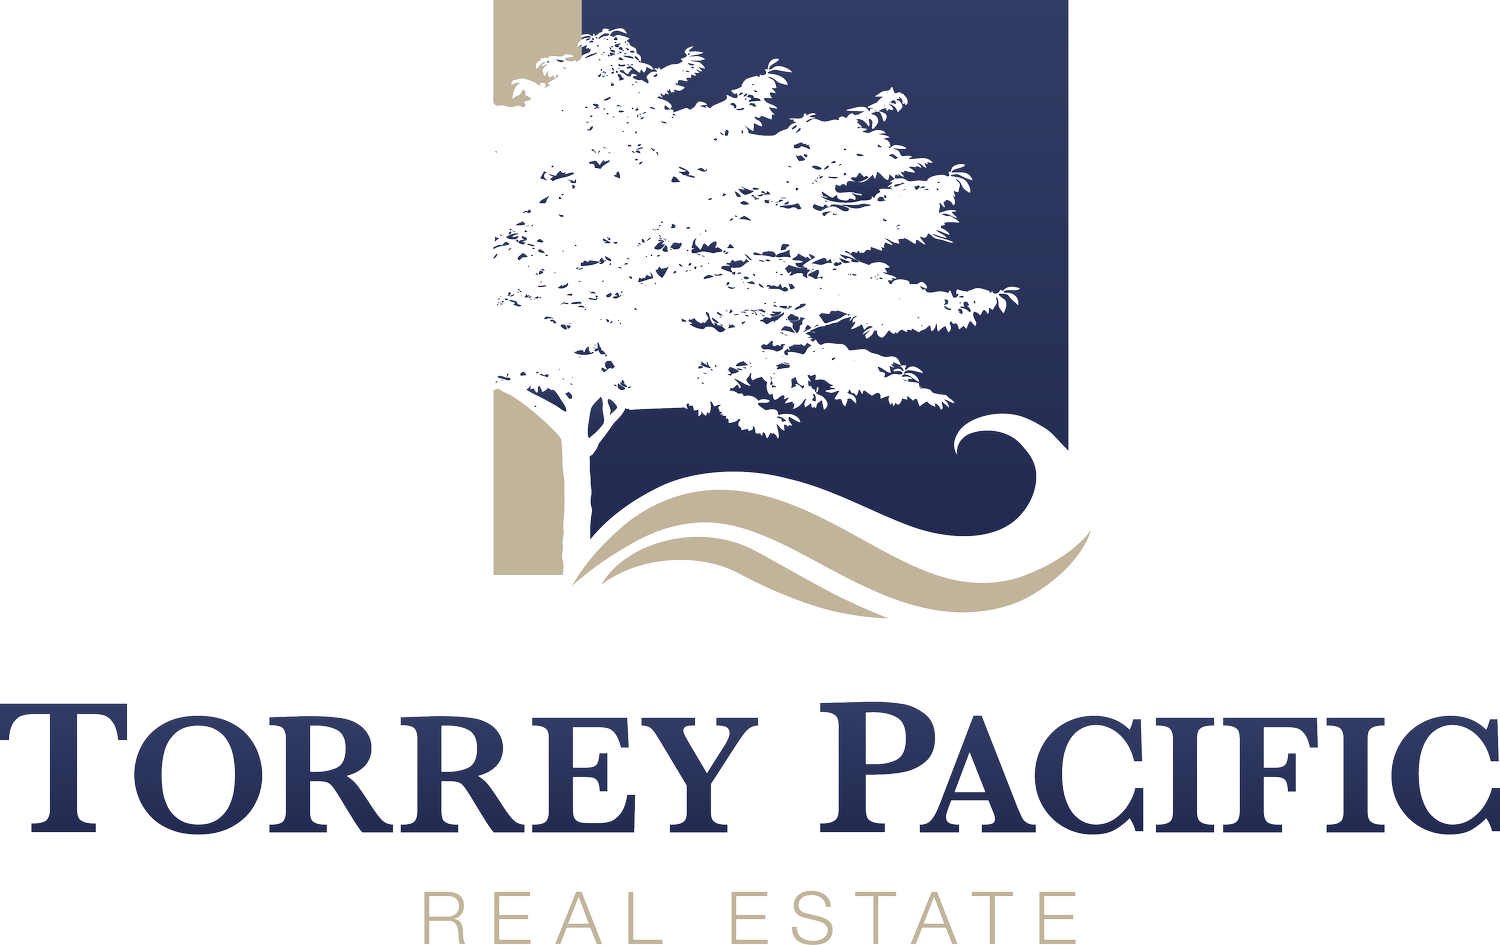 Torrey Pacific Real Estate, Real Estate Sales, Property Management and Vacation Rentals